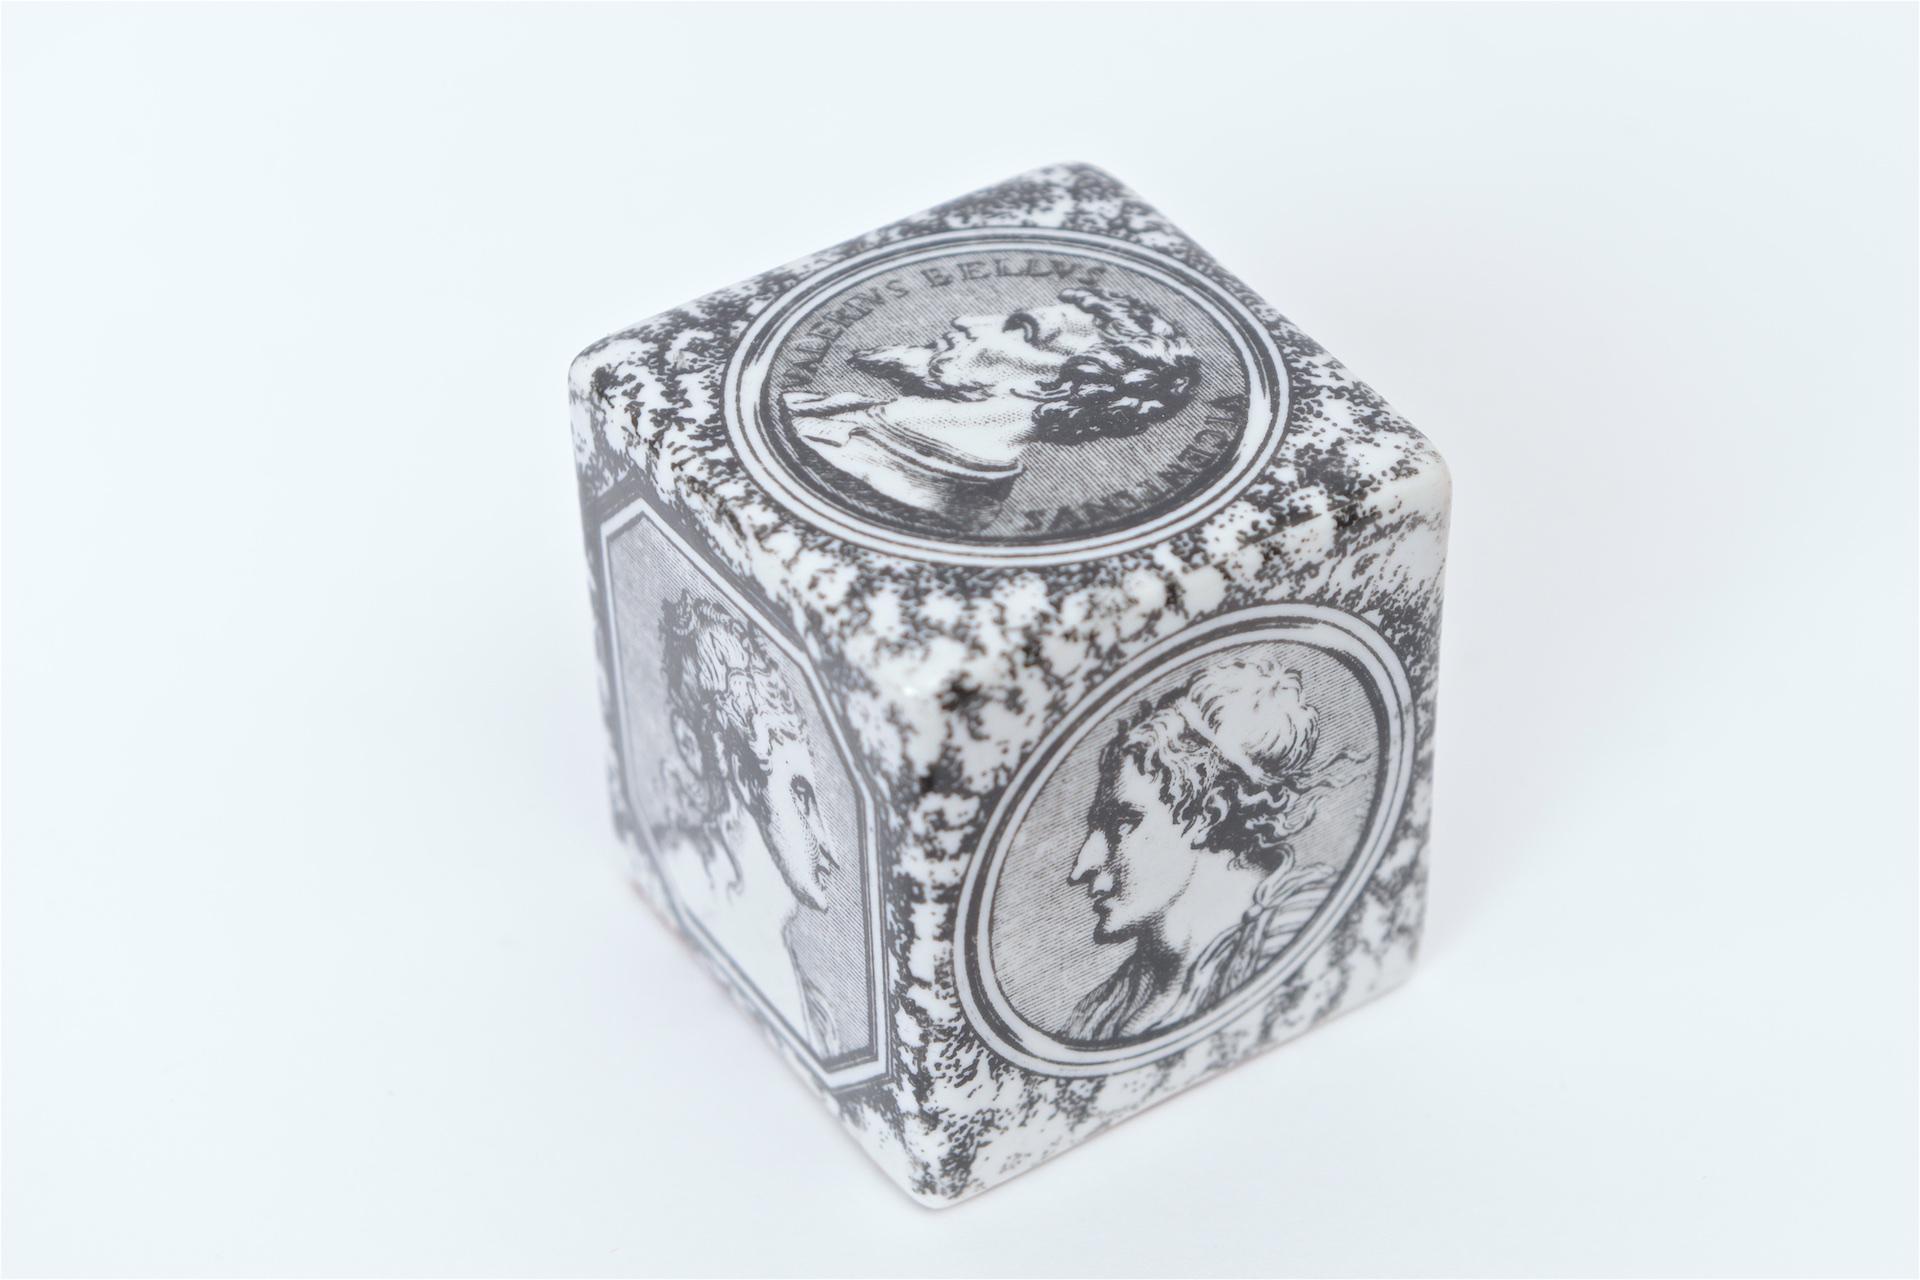 A rare cubic paperweight from the 1950s designed by Piero Fornasetti. This black and white porcelain paperweight is decorated on each side of the cube with the profiles of six Roman heads. Another identical paperweight was seen as part of the family